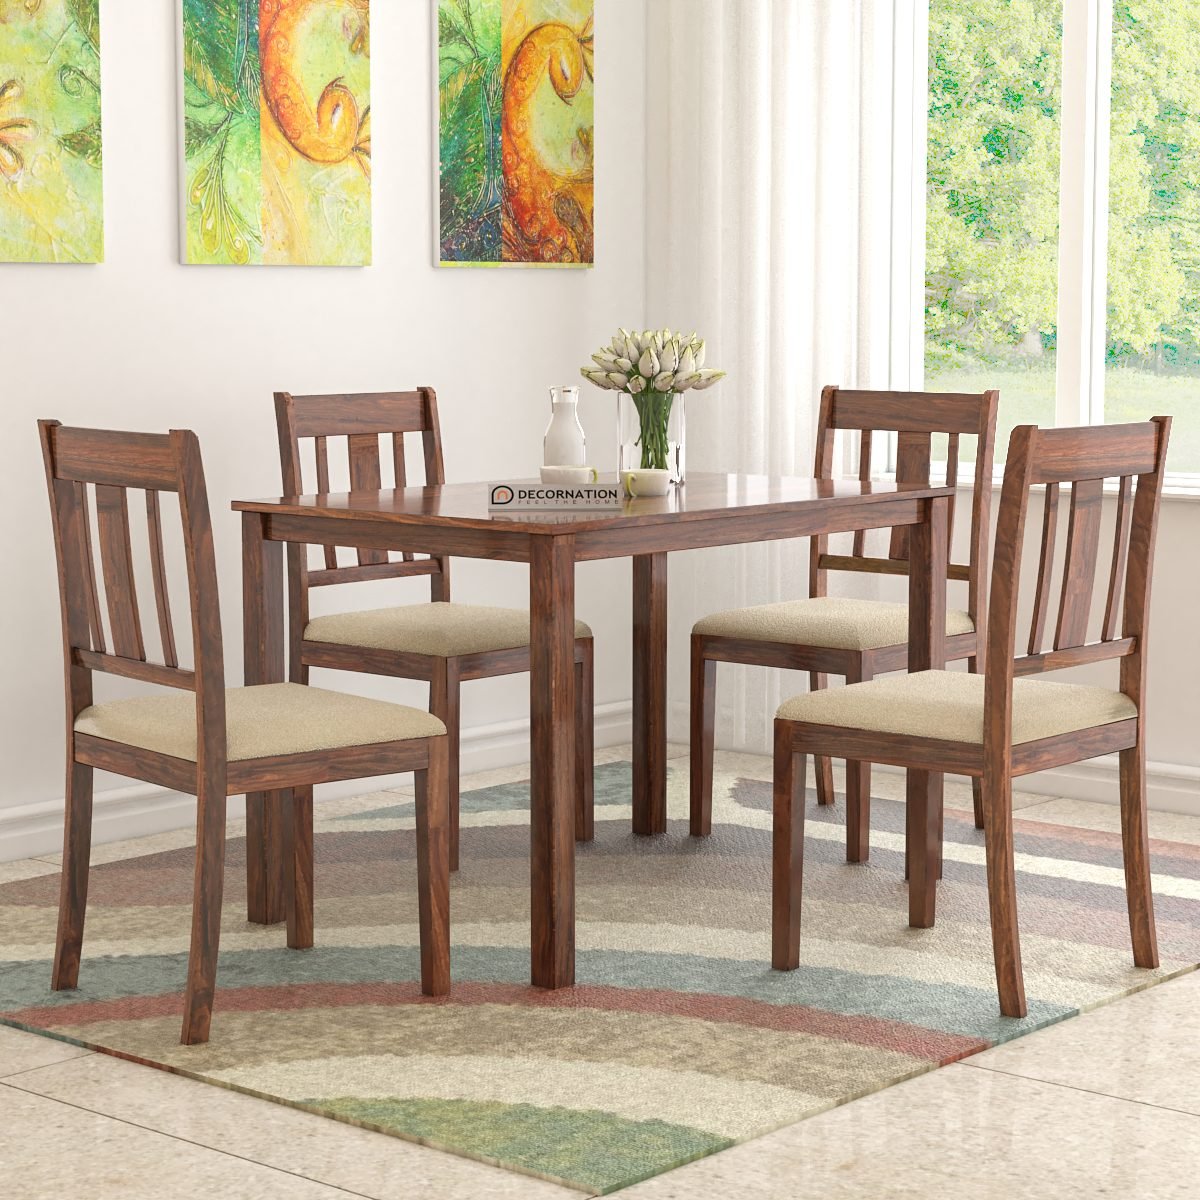 Anya Wooden 4 Seater Dining Table Set